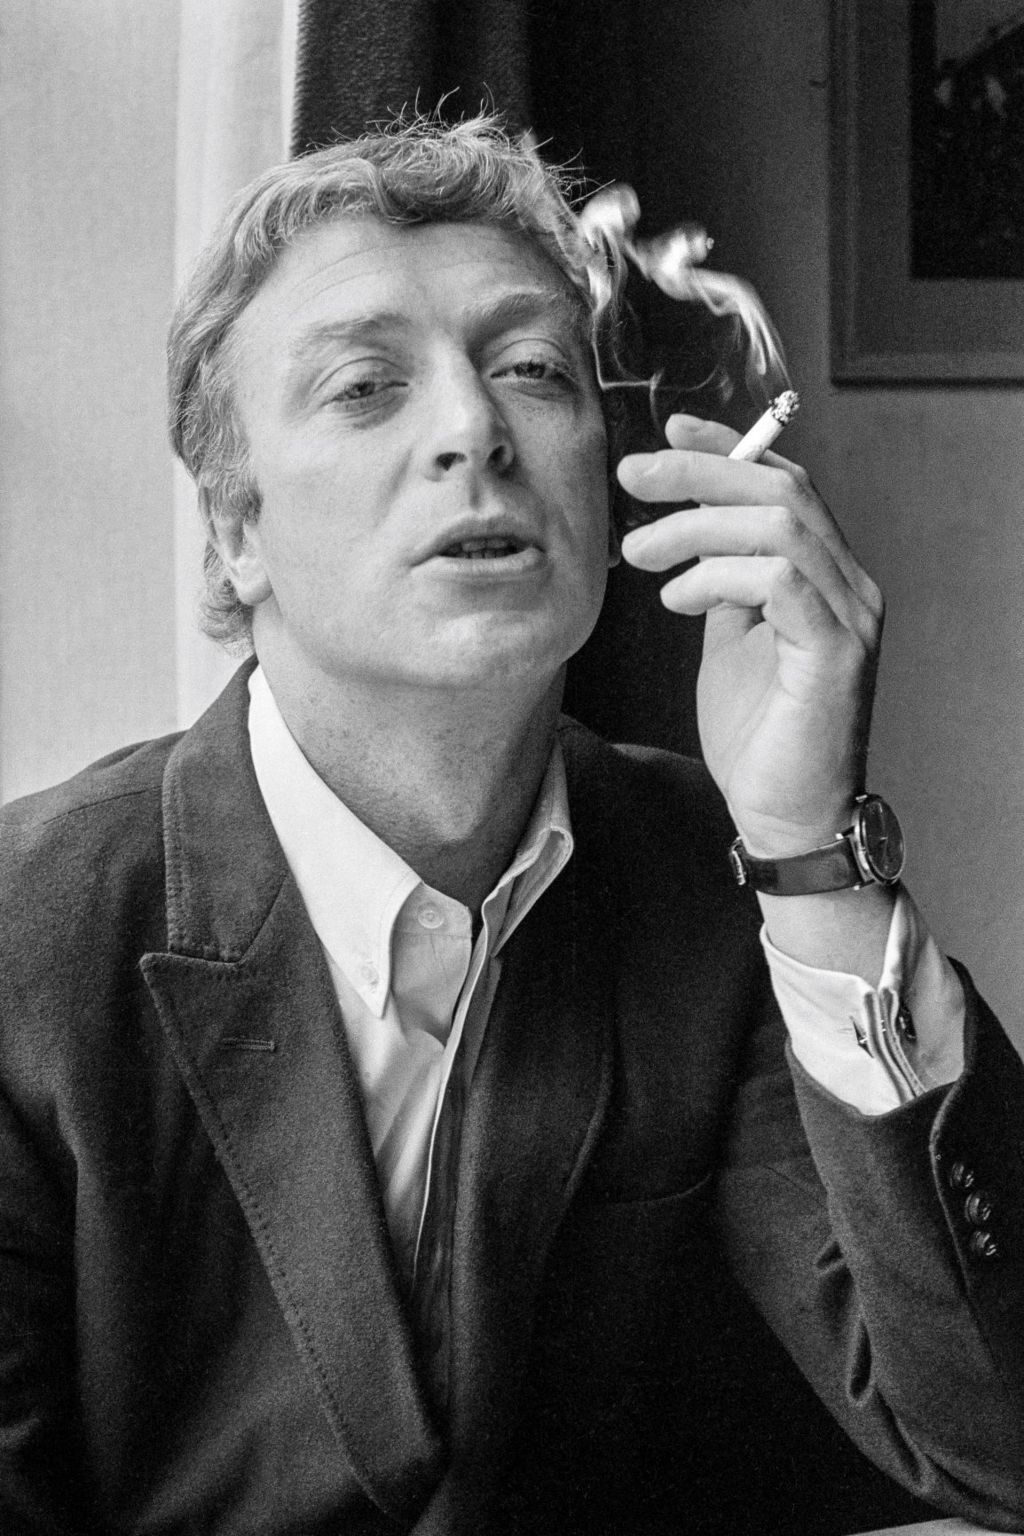 Michael Caine in 1965